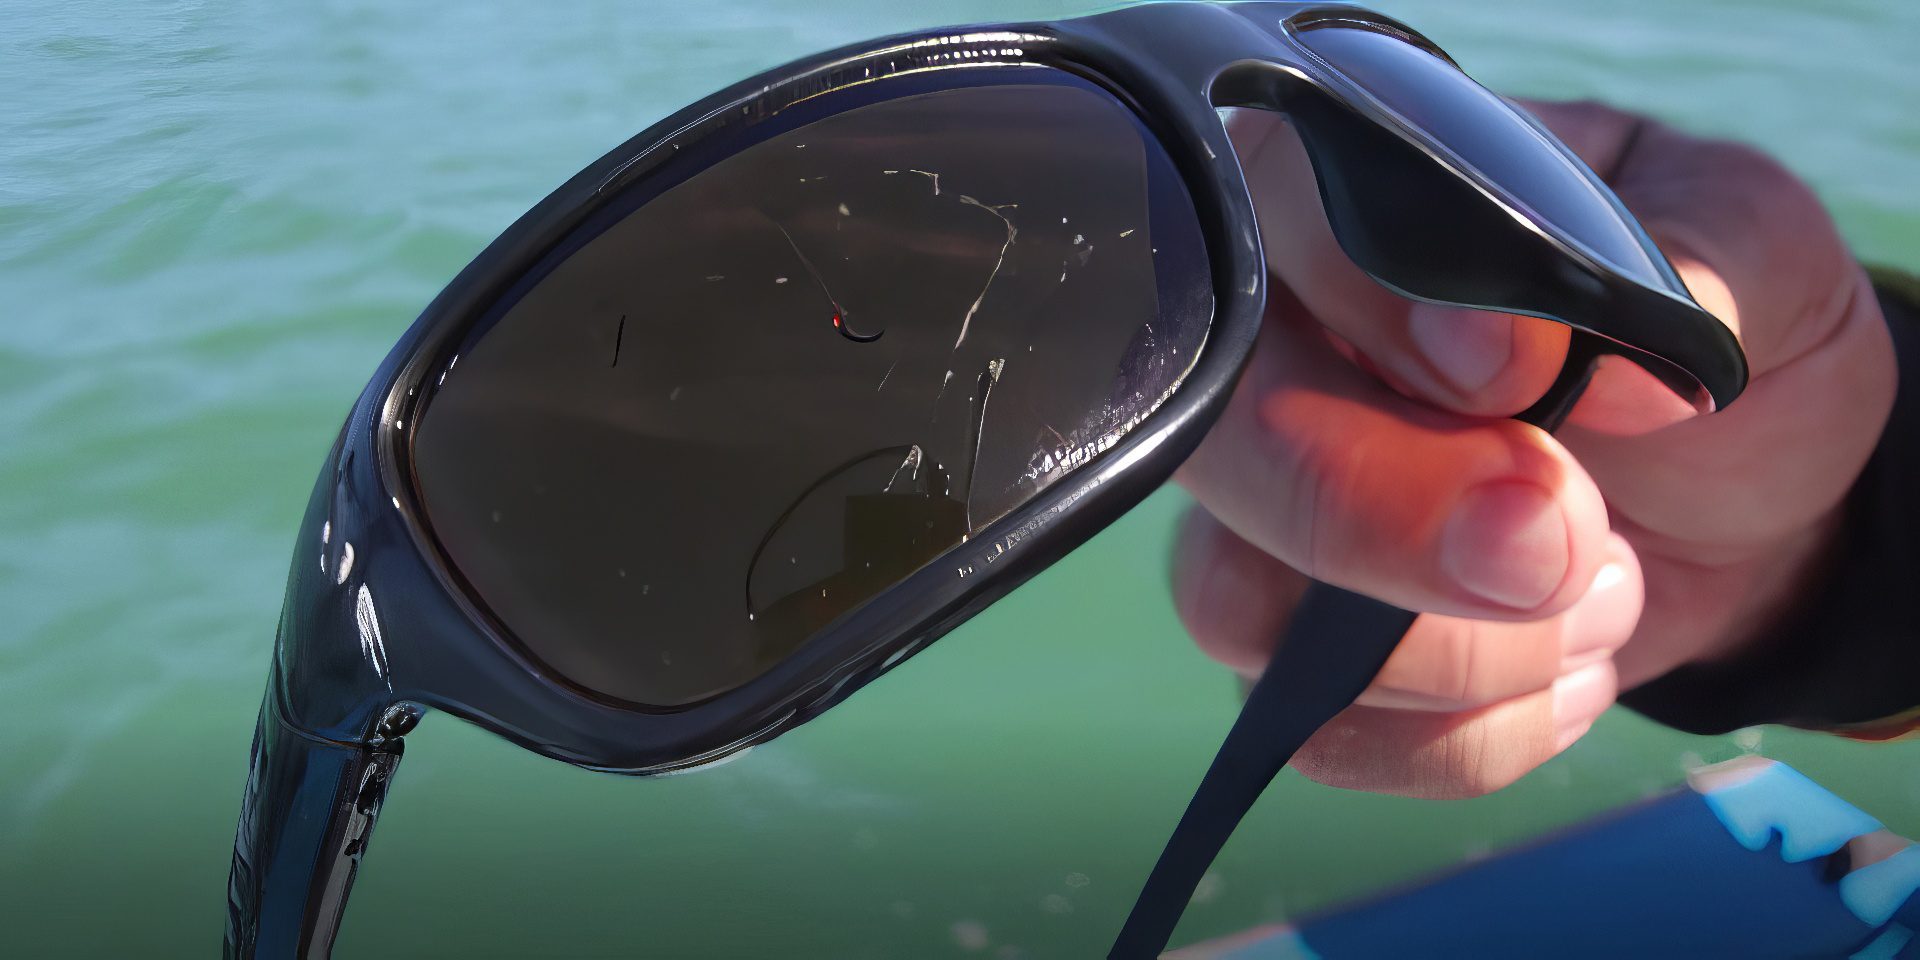 Salt spray on sunglasses removed quick and easy - Ryan Moody Fishing